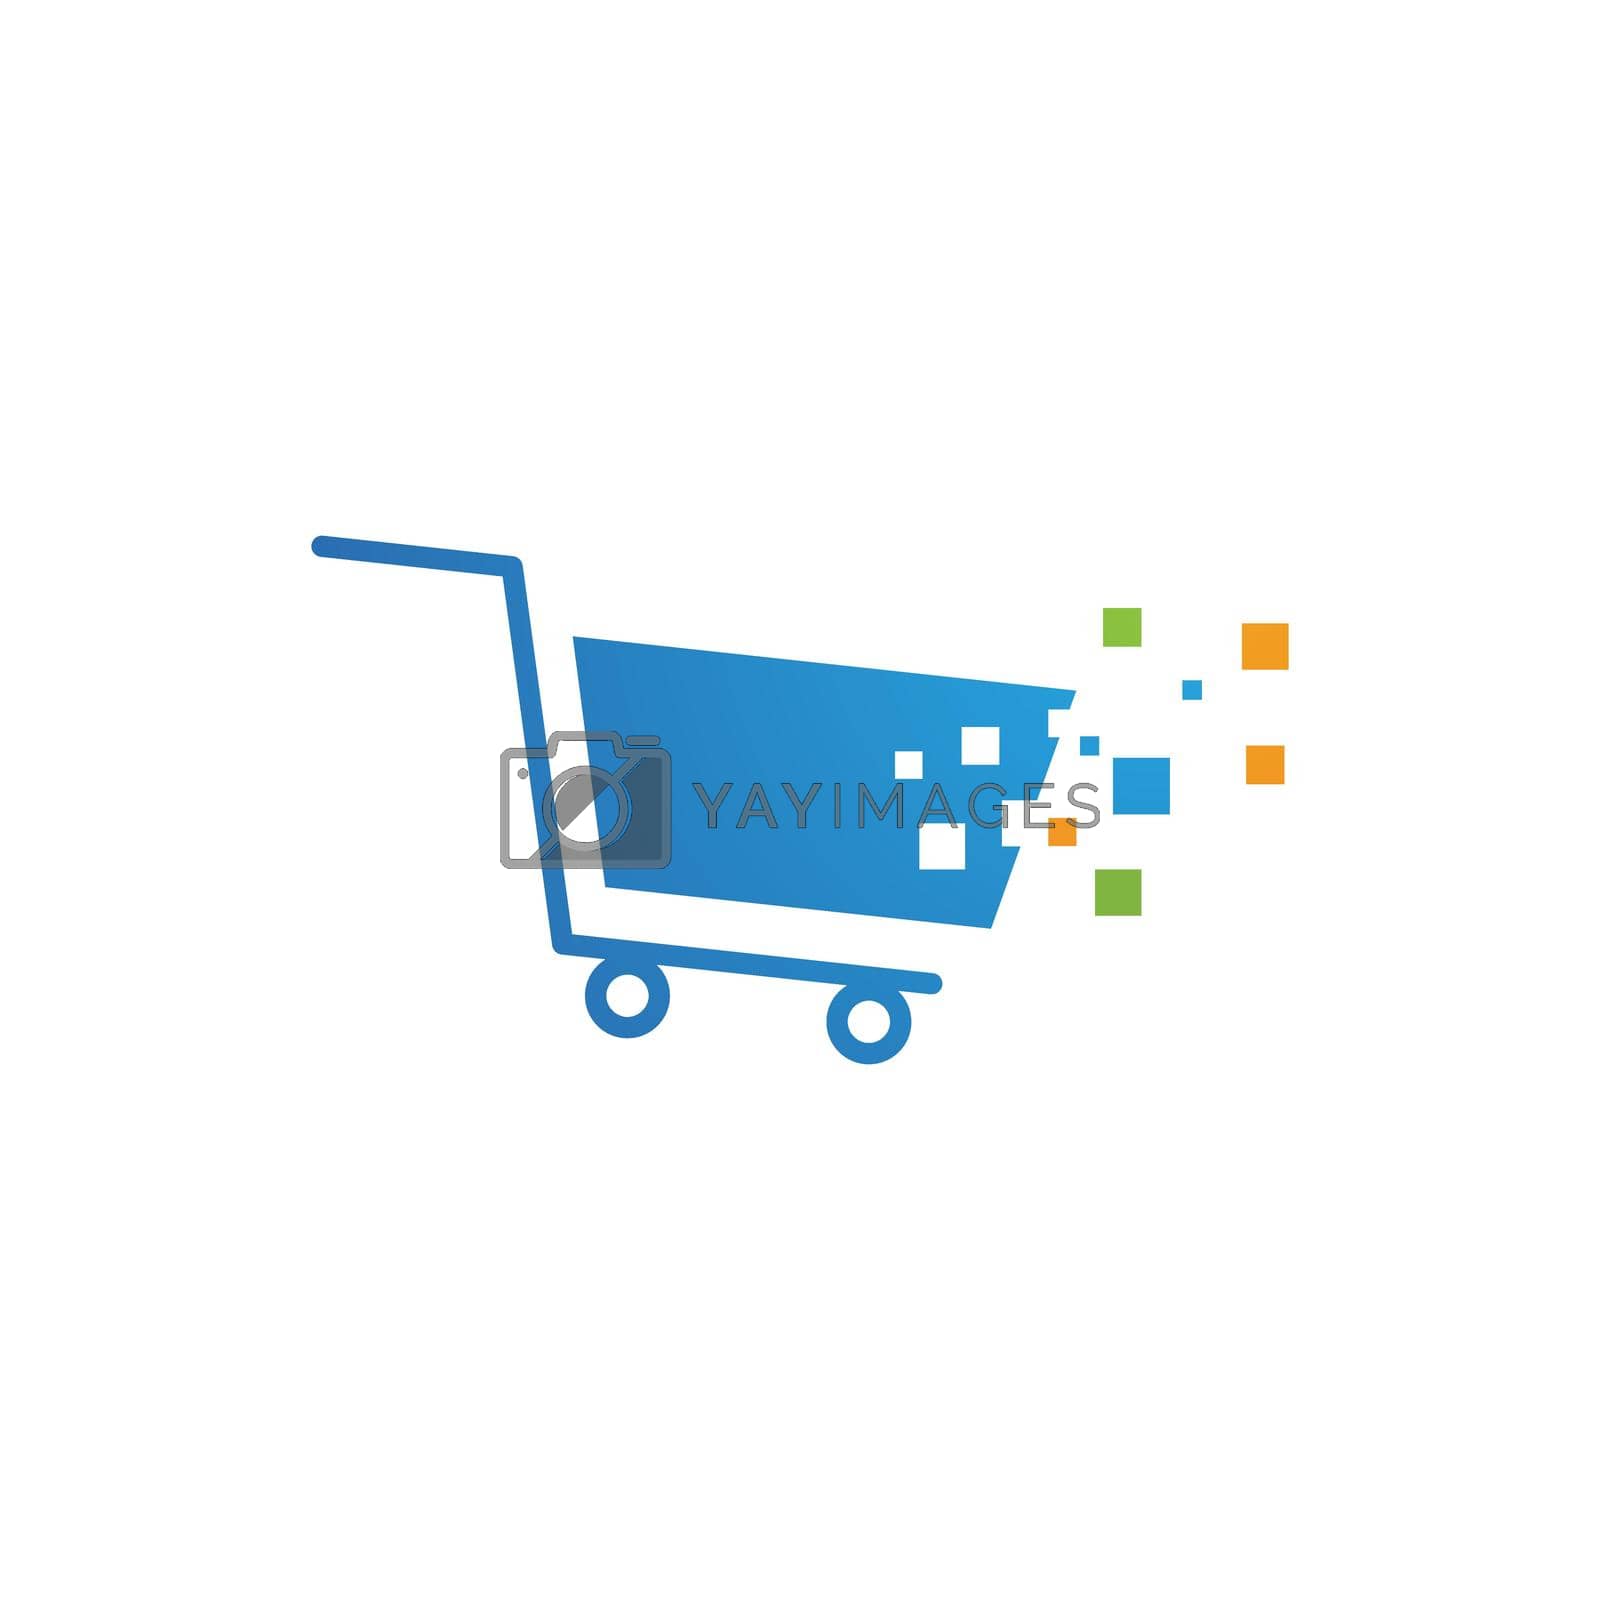 Royalty free image of Trolley icon by awk